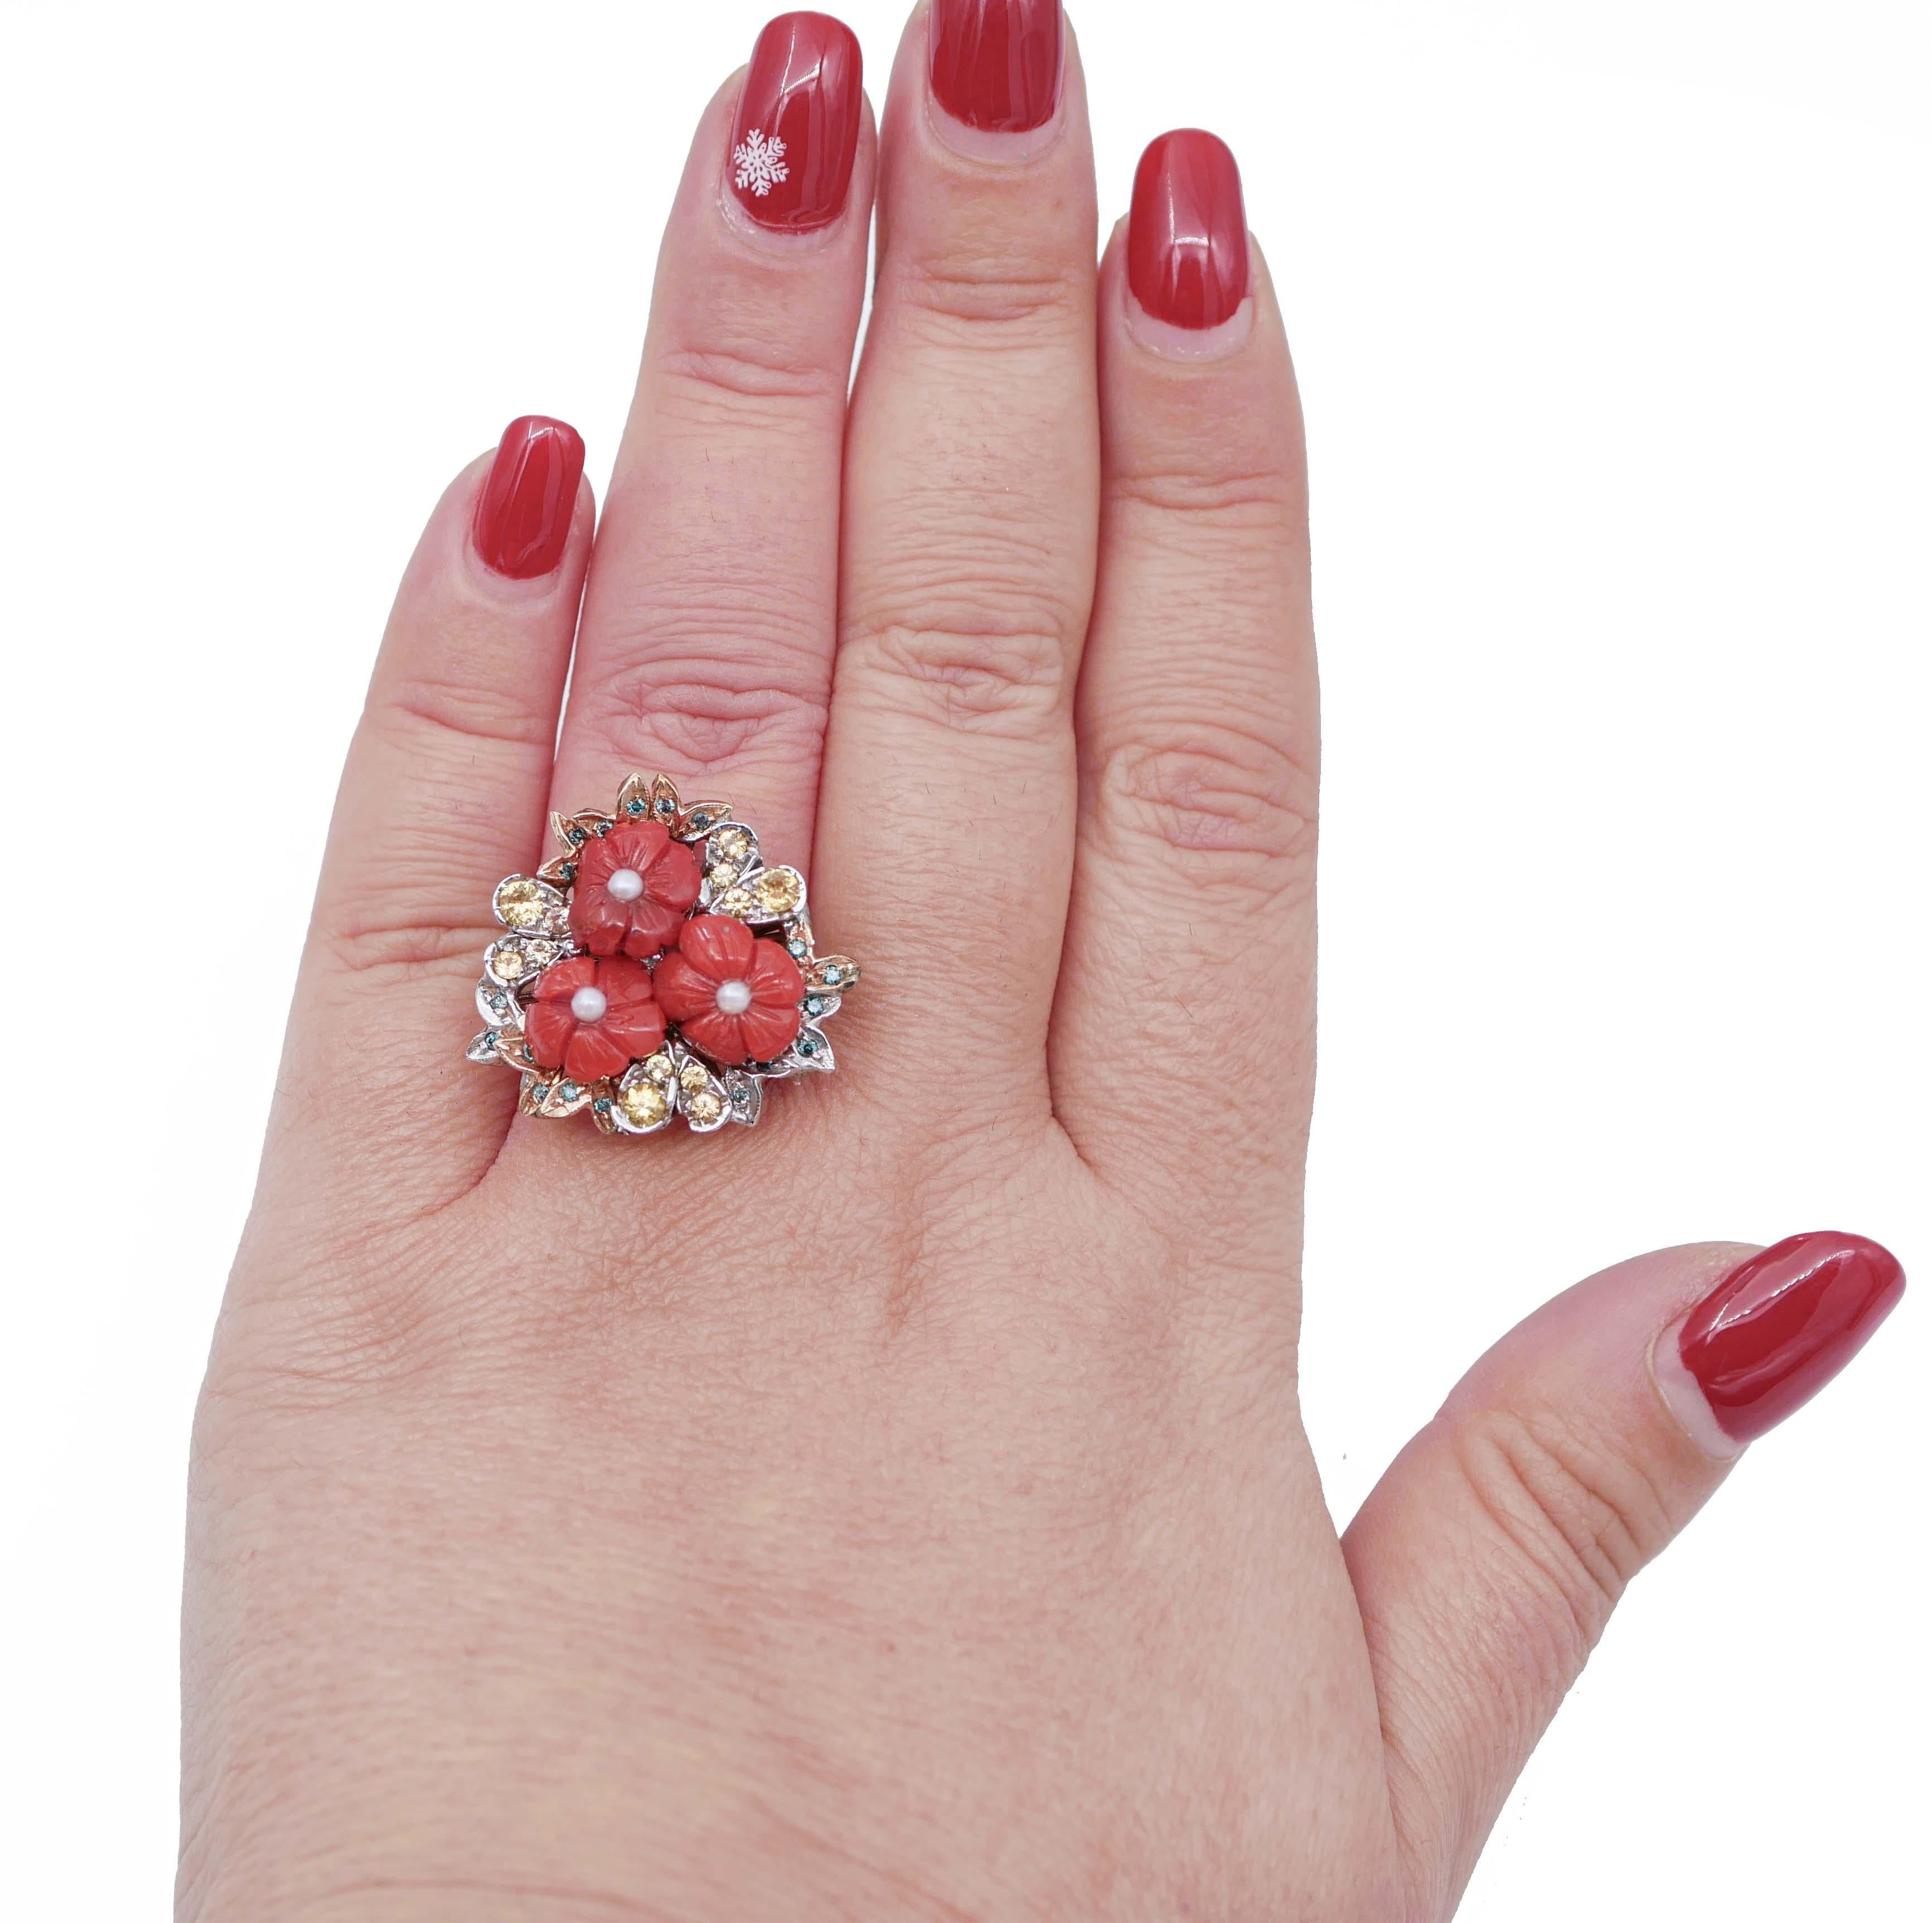 Mixed Cut Coral, Fancy Diamonds, Sapphires, Pearls, 14 Karat White and Rose Gold Ring For Sale